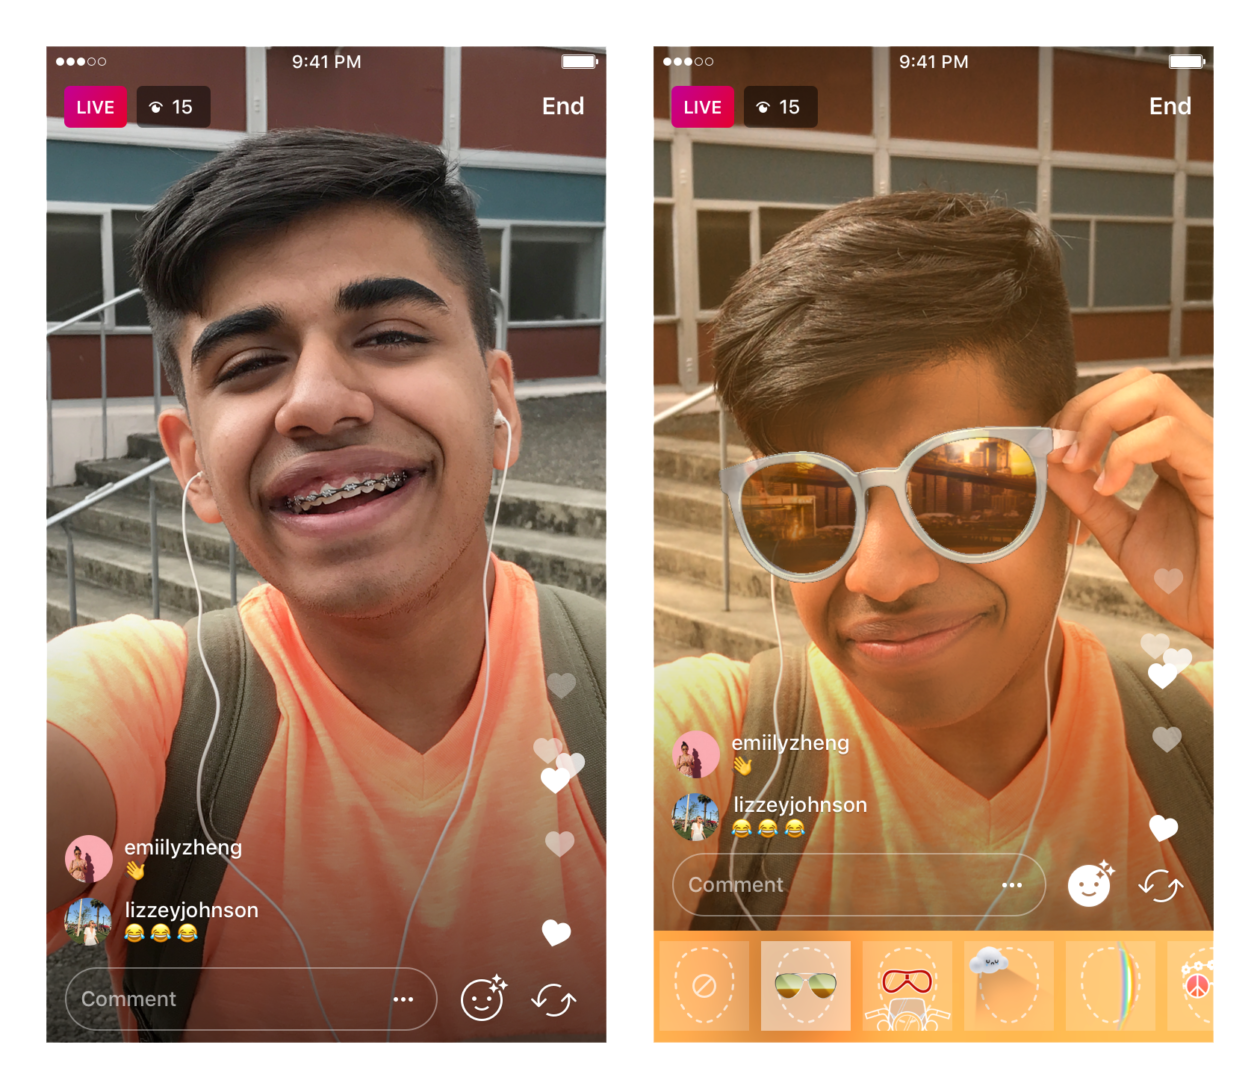 Instagram now allows the application of facial filters also in live streams